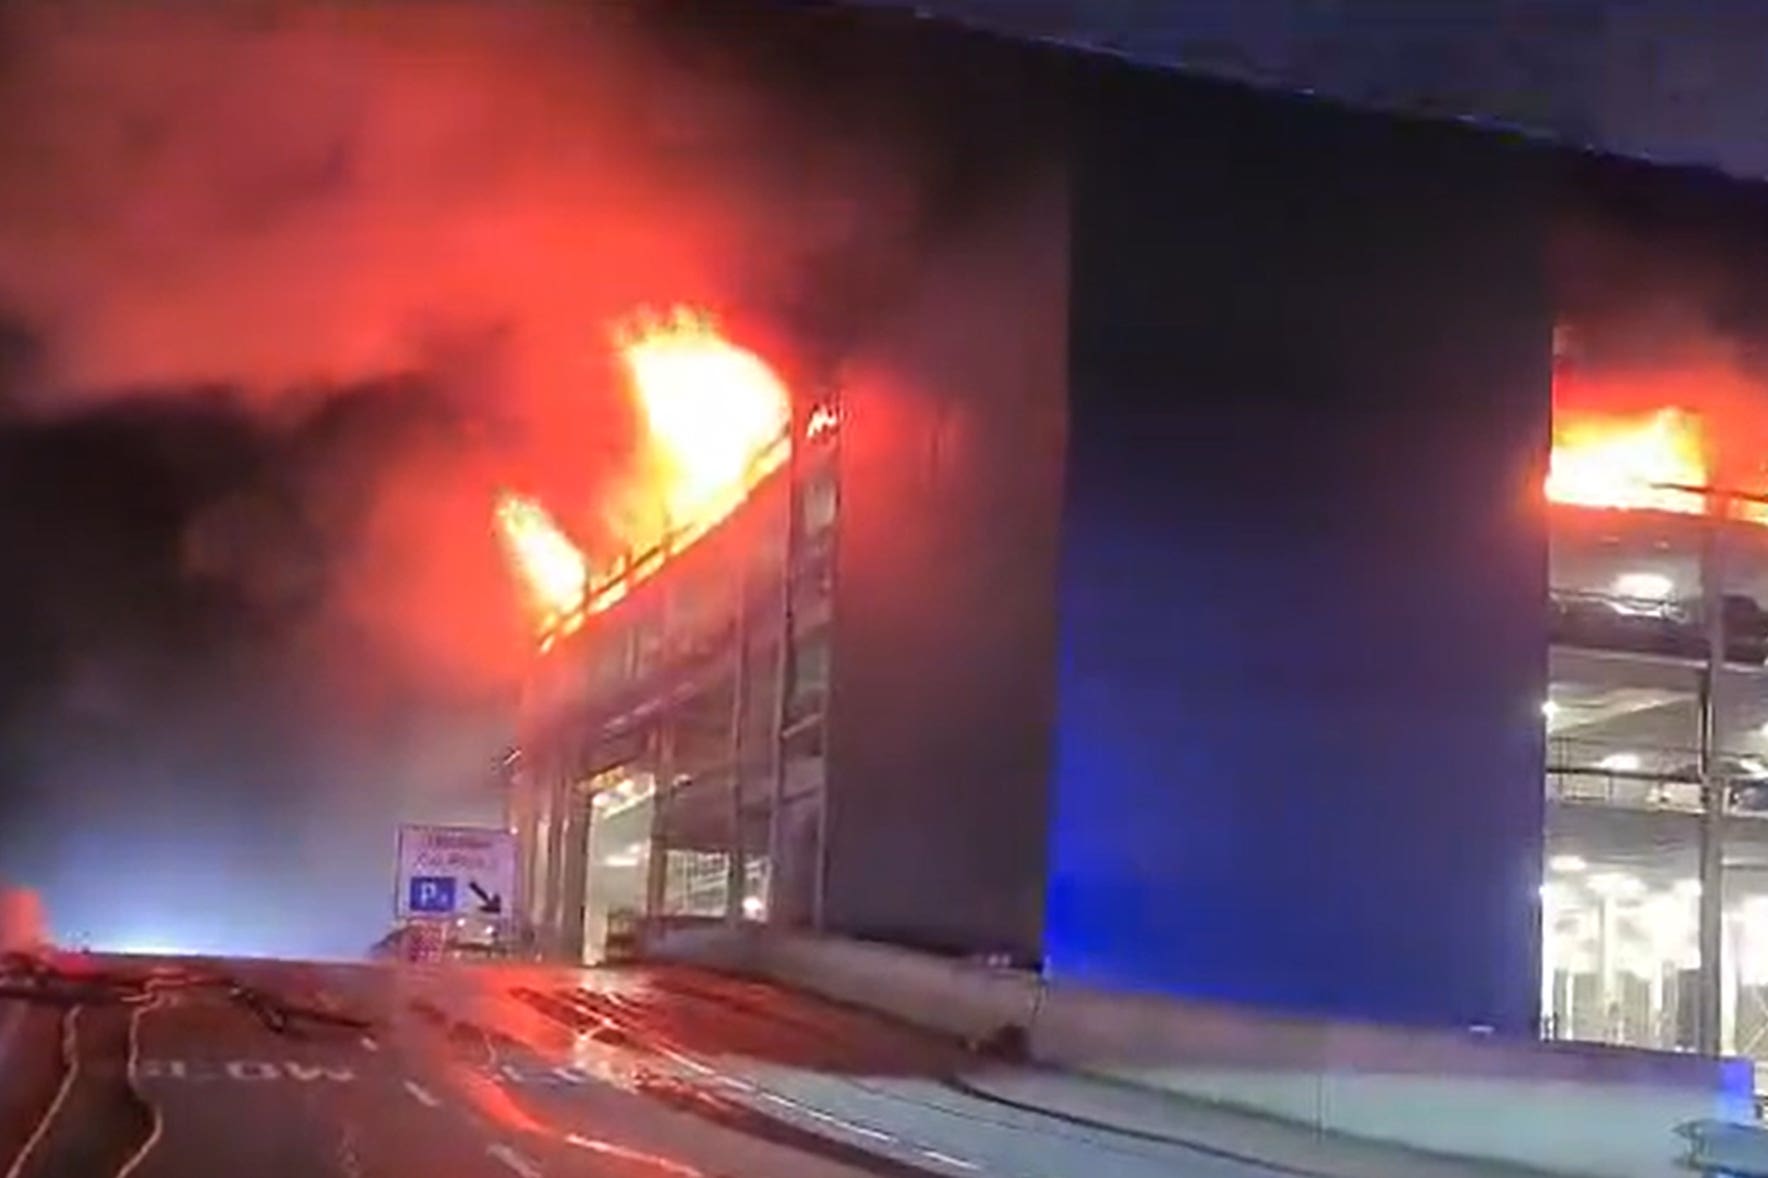 Firefighters battled through the night to bring the car park fire under control